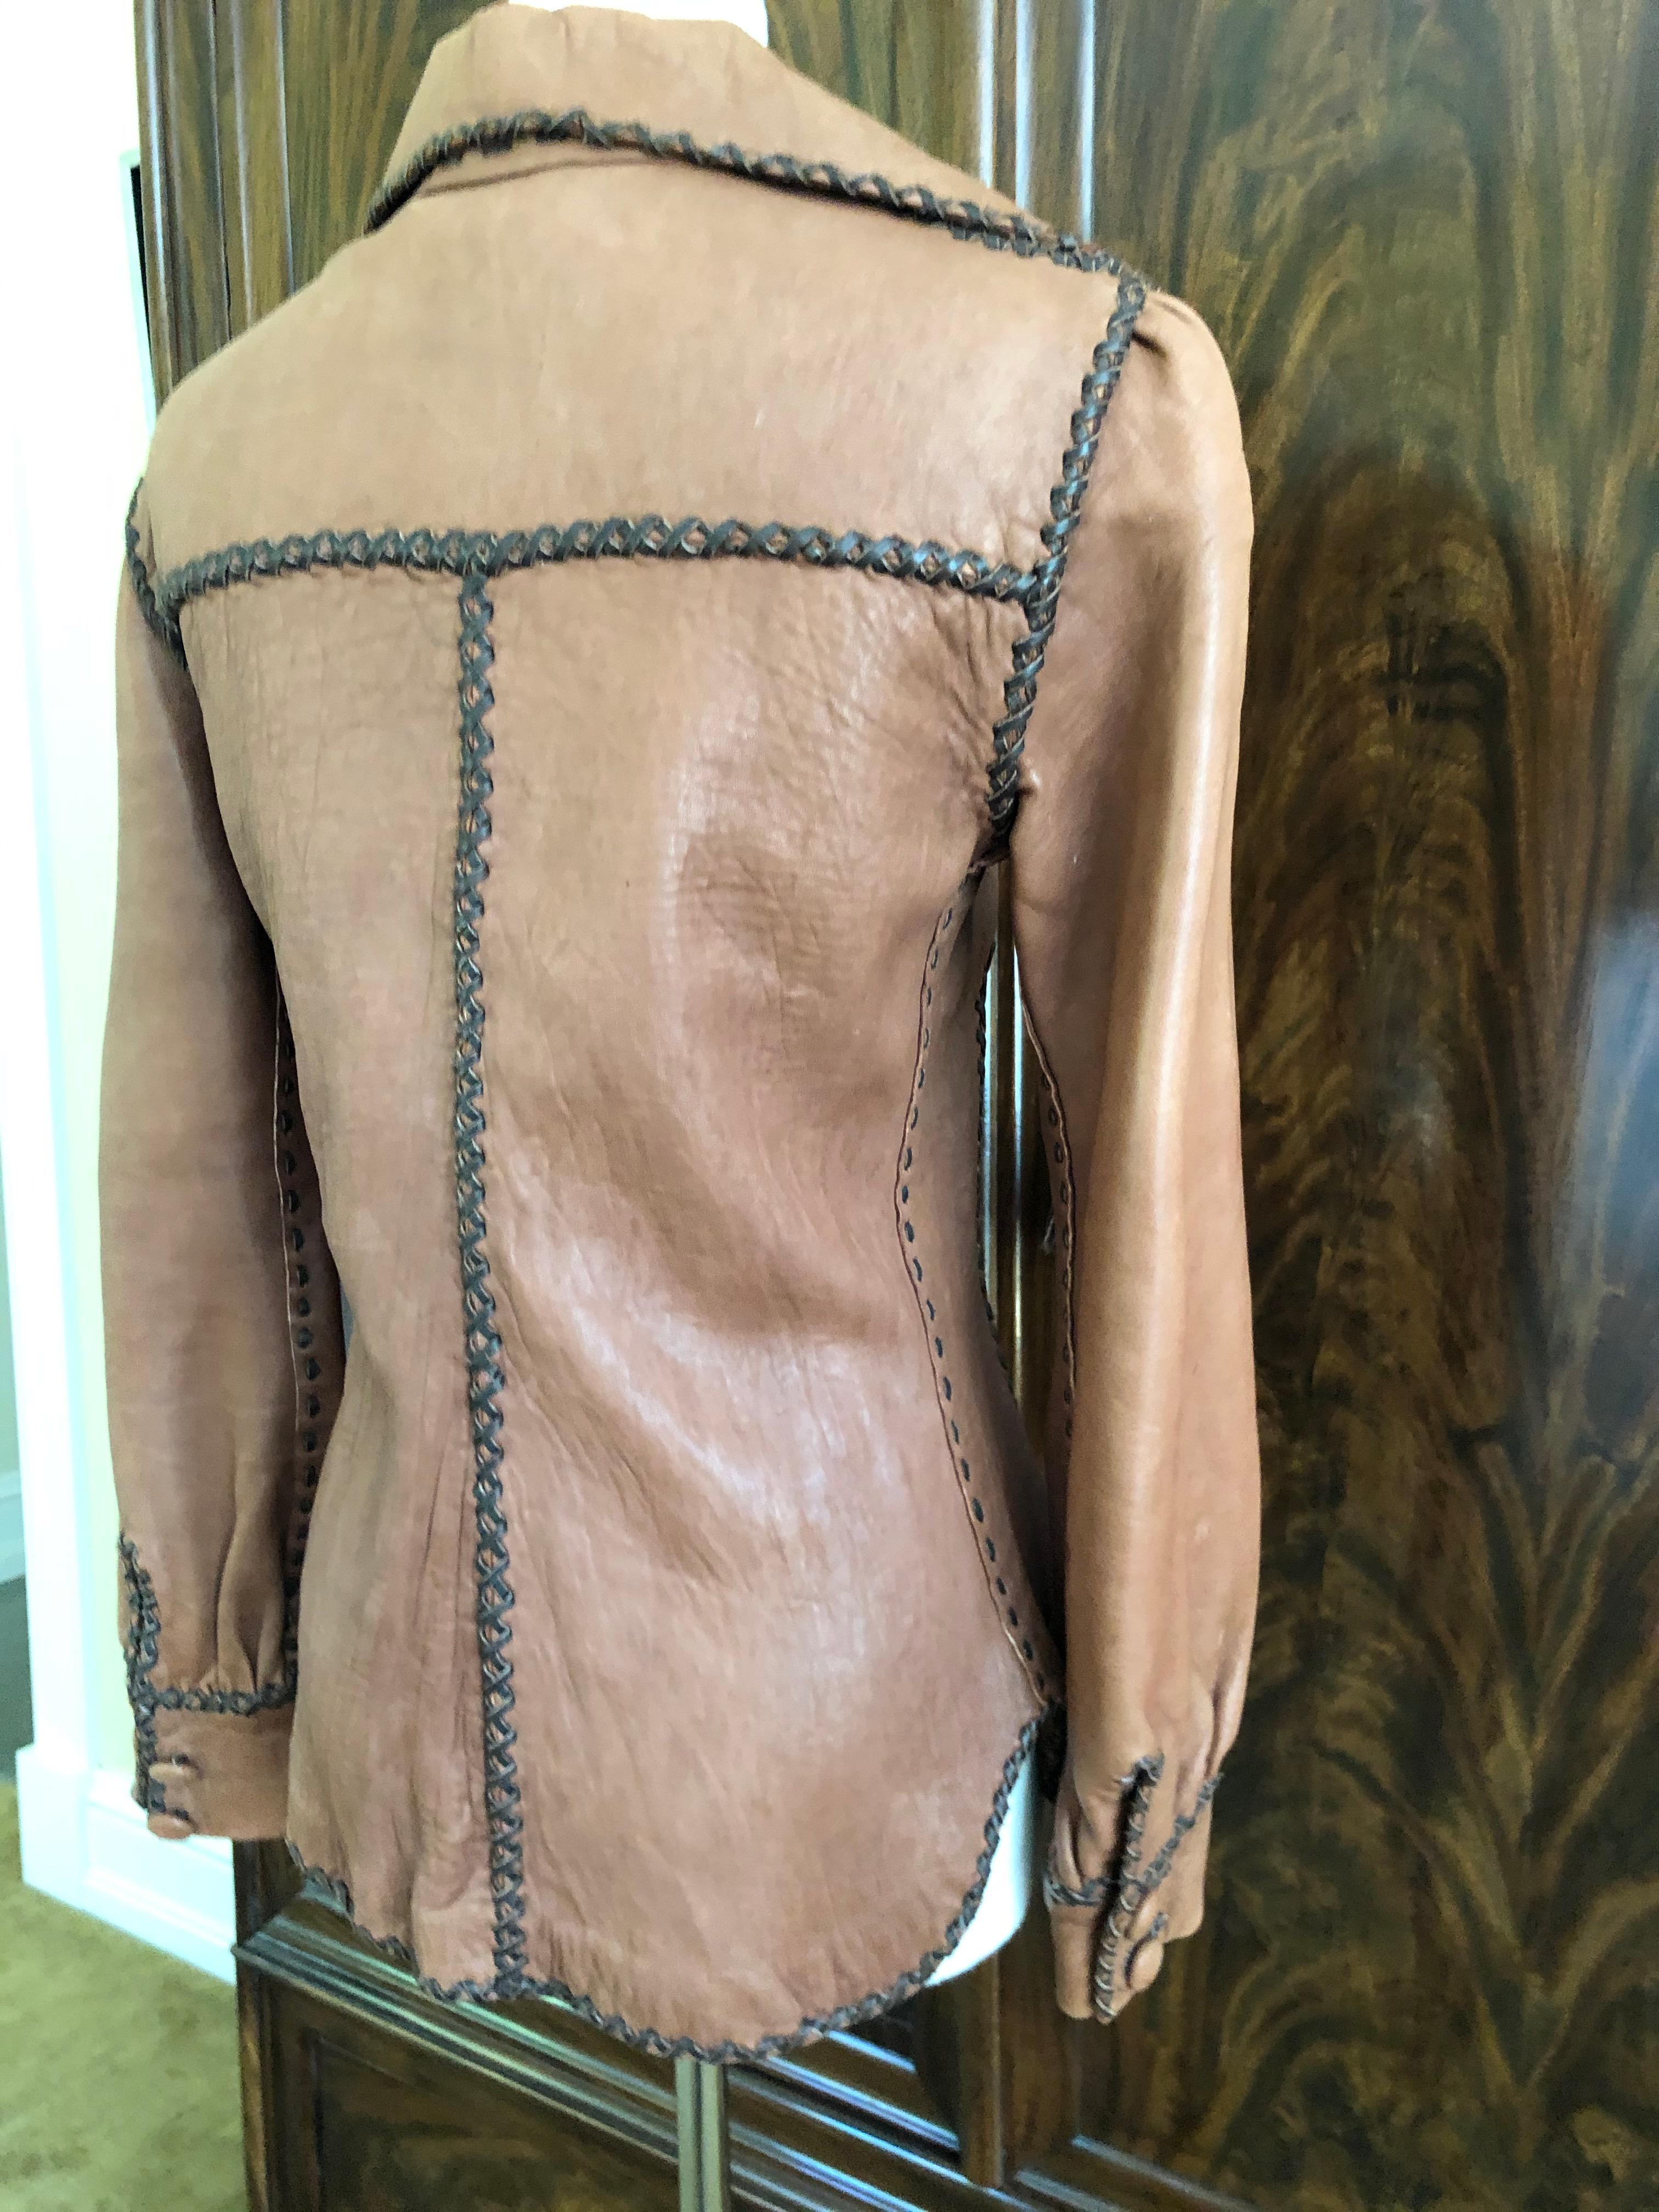 North Beach Leather Early 1970's Whipstitched Leather Rich Hippie Jacket In Good Condition For Sale In Cloverdale, CA